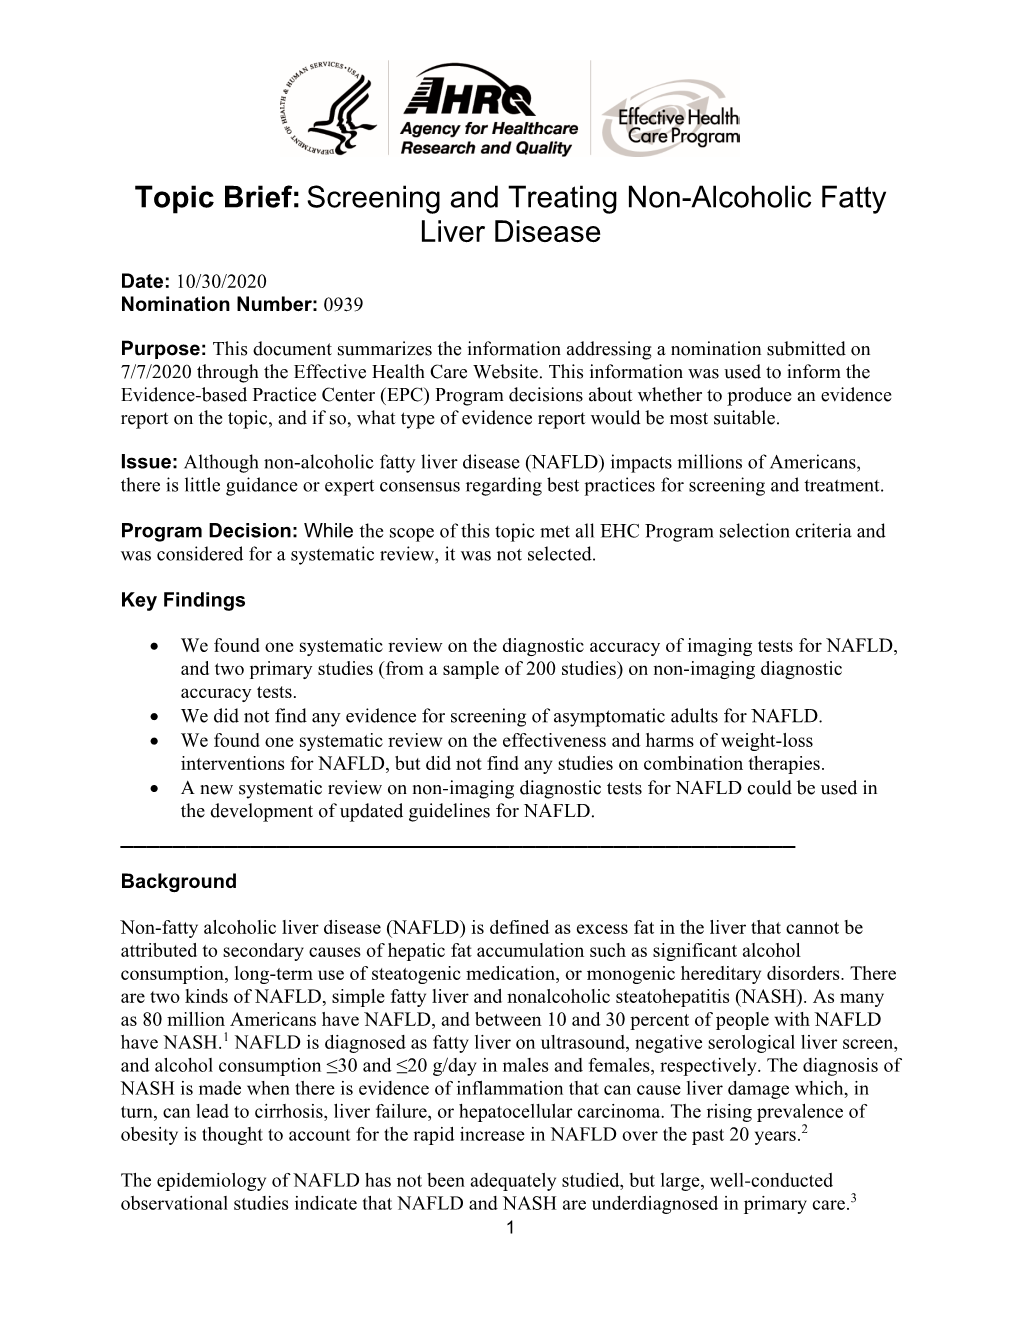 Topic Brief: Screening and Treating Non-Alcoholic Fatty Liver Disease